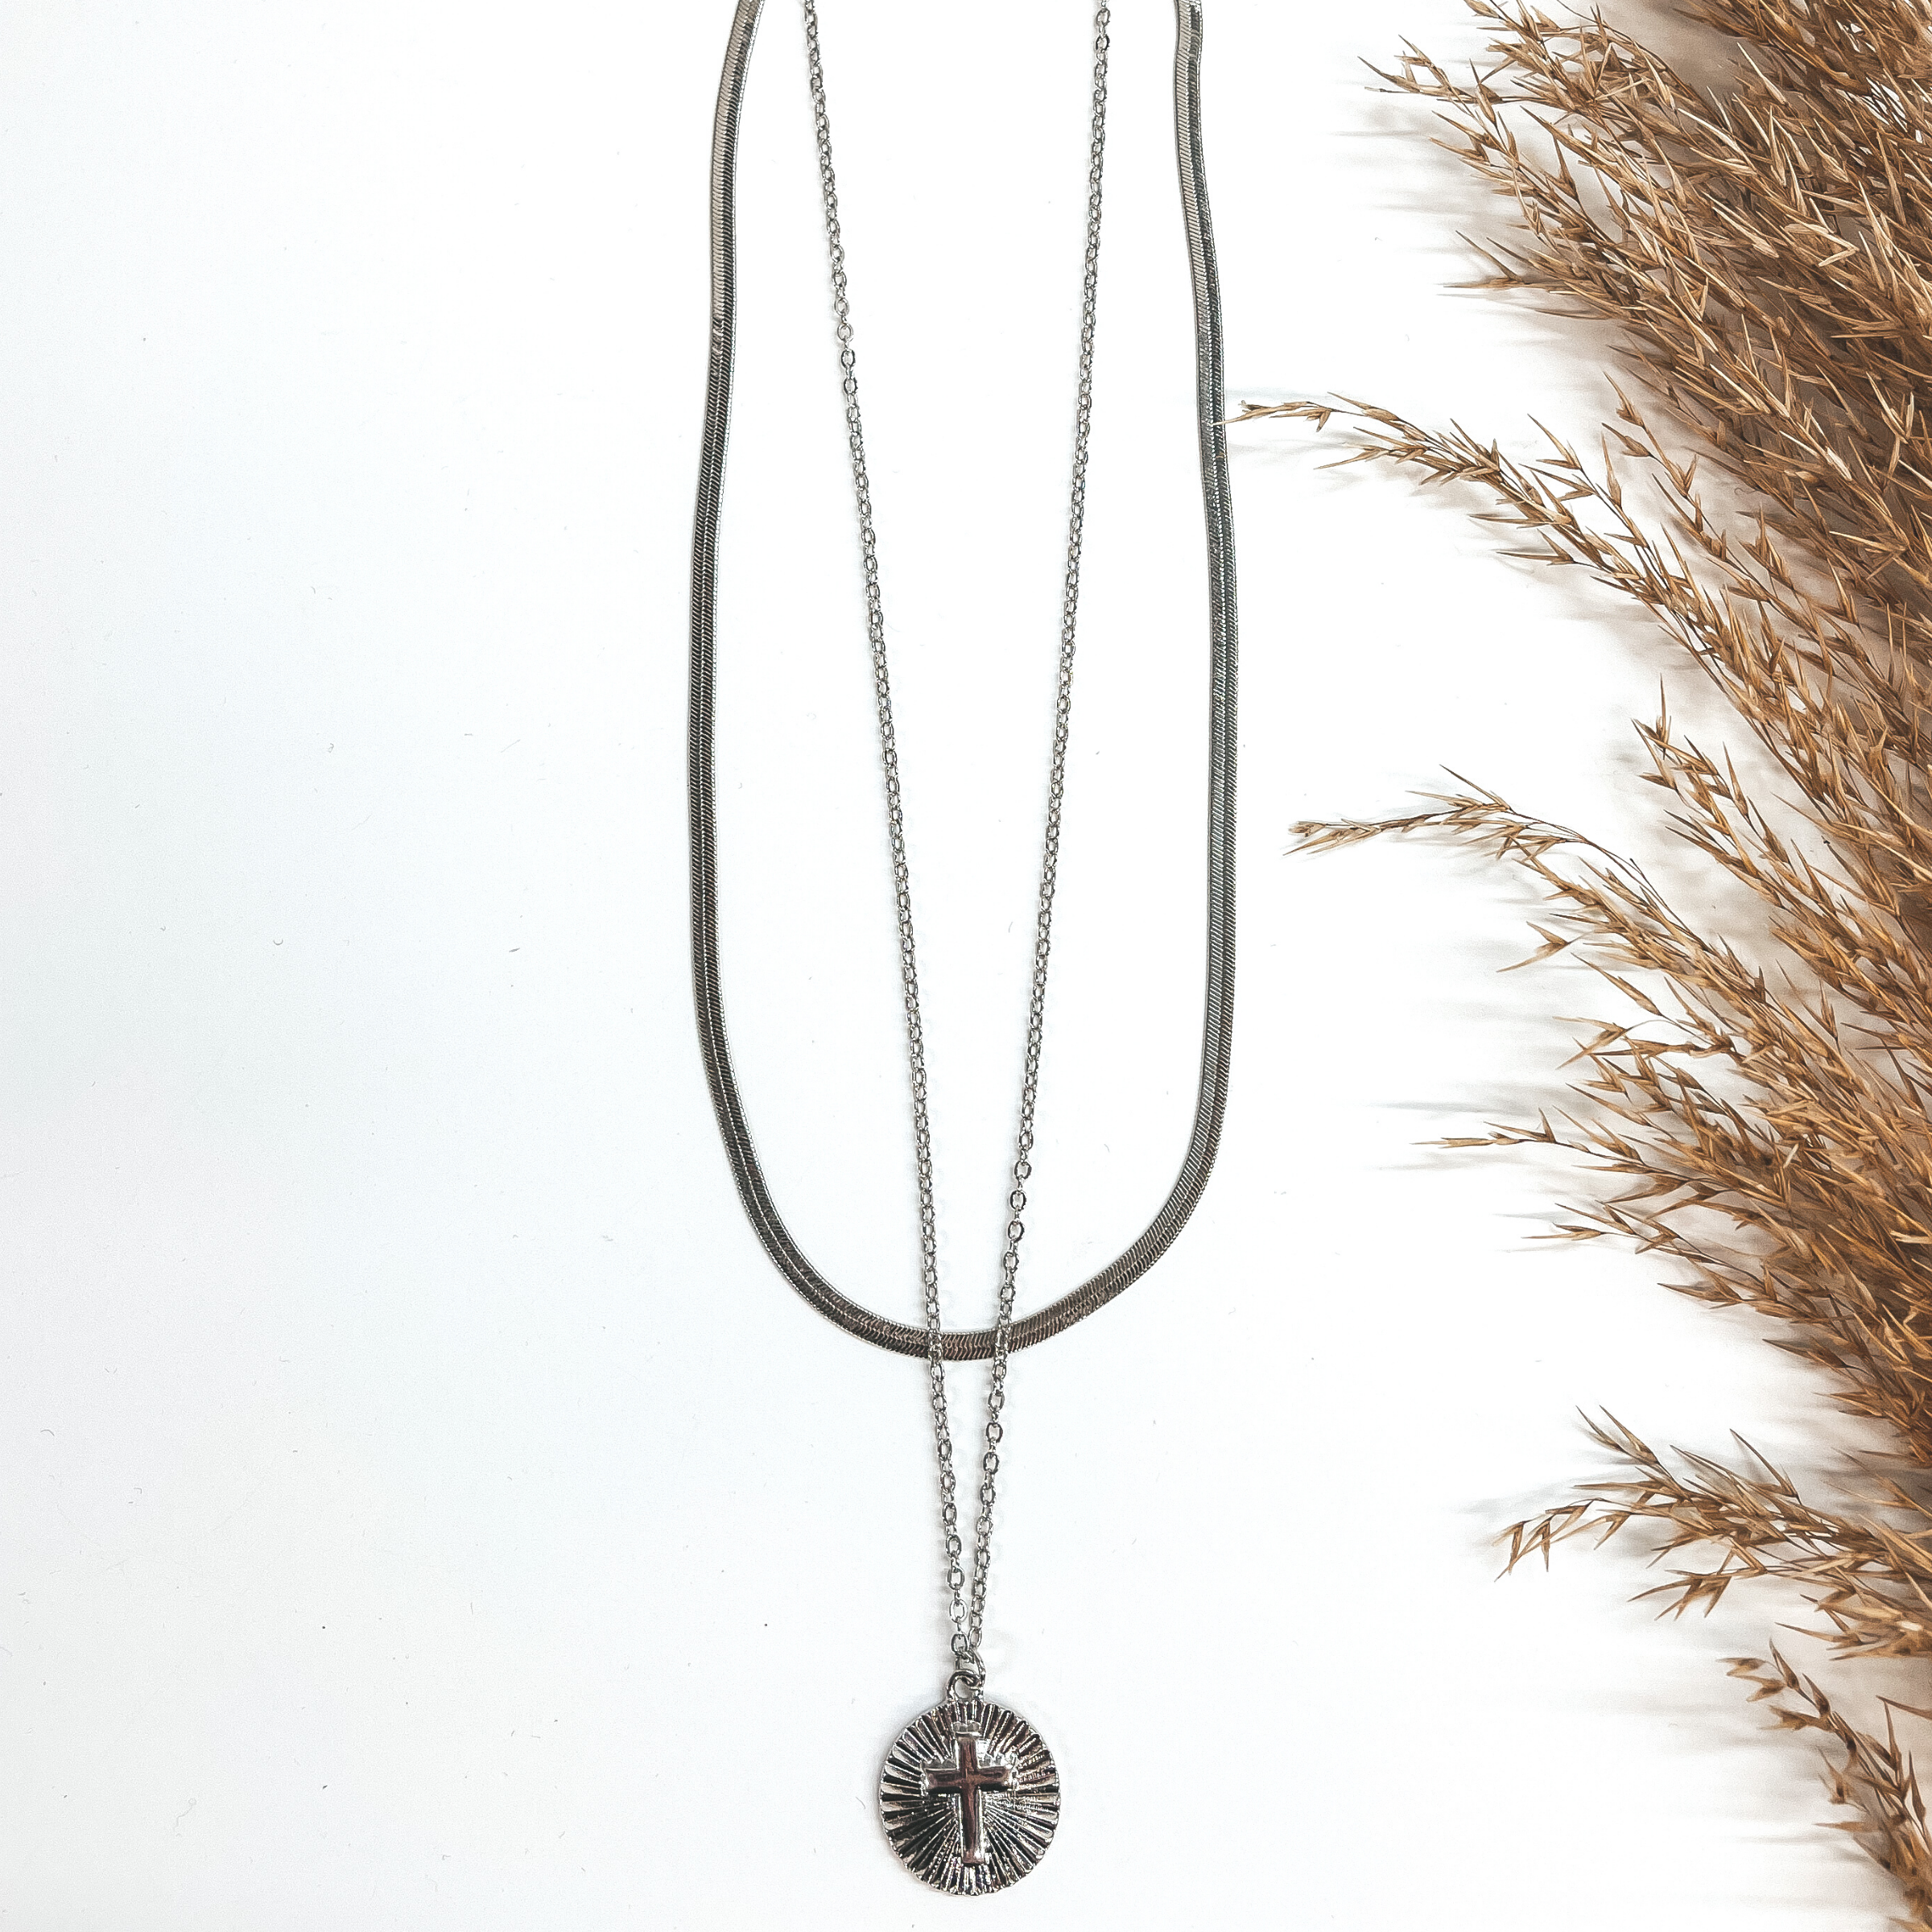 This is a double chained necklace in silver with a  circle pendant. The shorter chain is a snake chain,  the longer chain has a circle sunburst pendant with  a cross. This is taken on a white background and a  brown plant in the side.